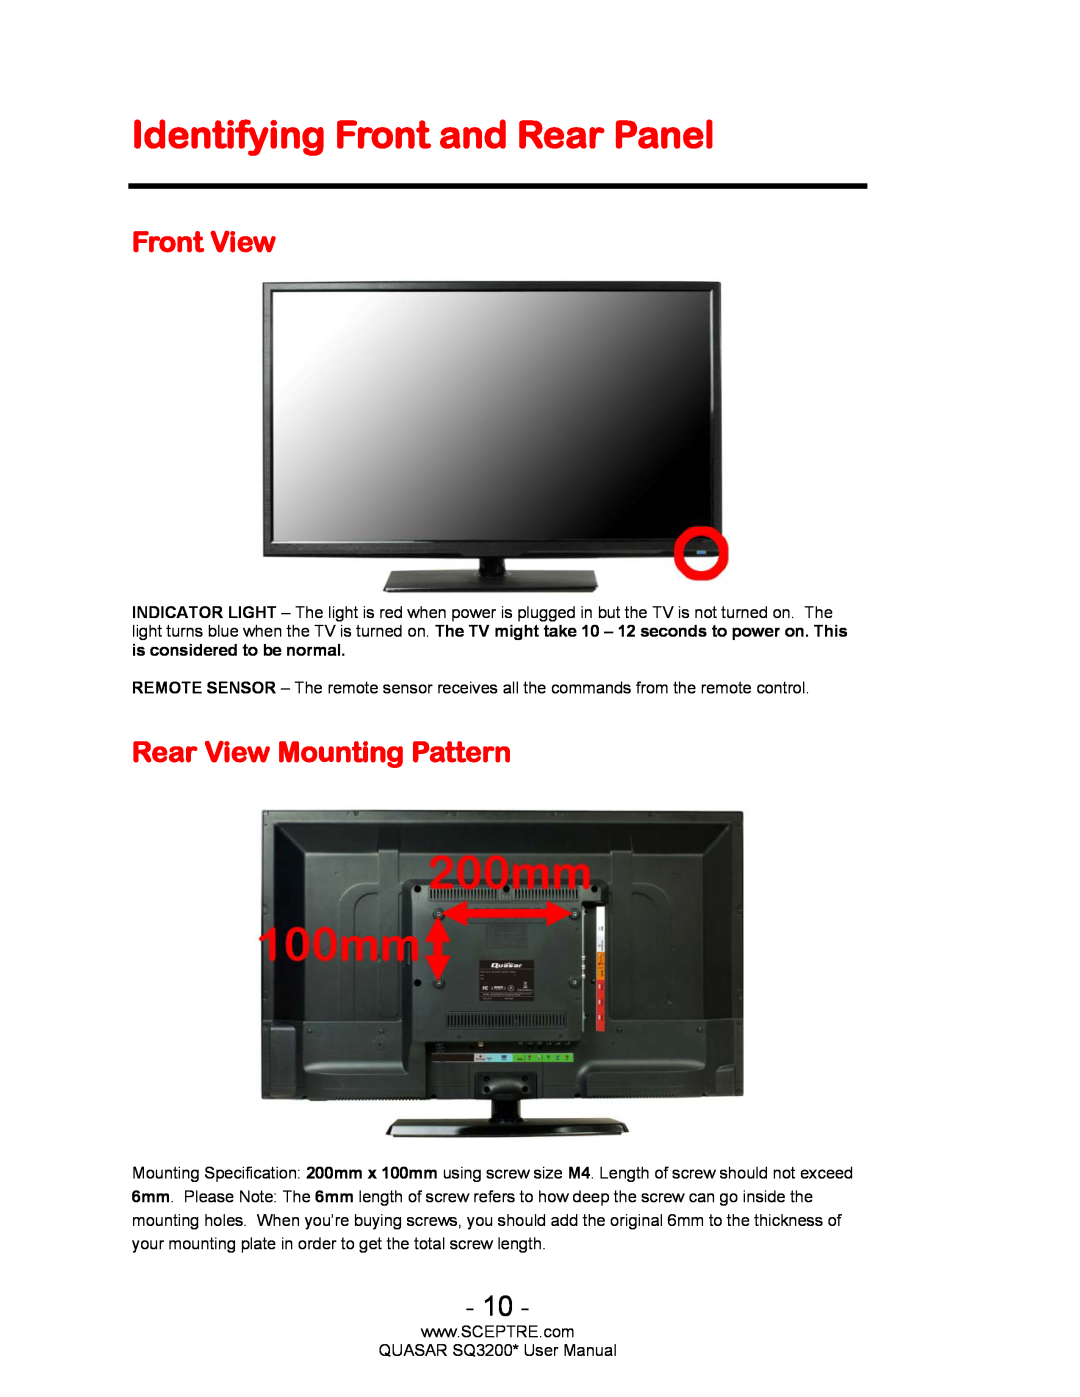 Sceptre Technologies HDTV, SQ3200 user manual Identifying Front and Rear Panel, Front View, Rear View Mounting Pattern 